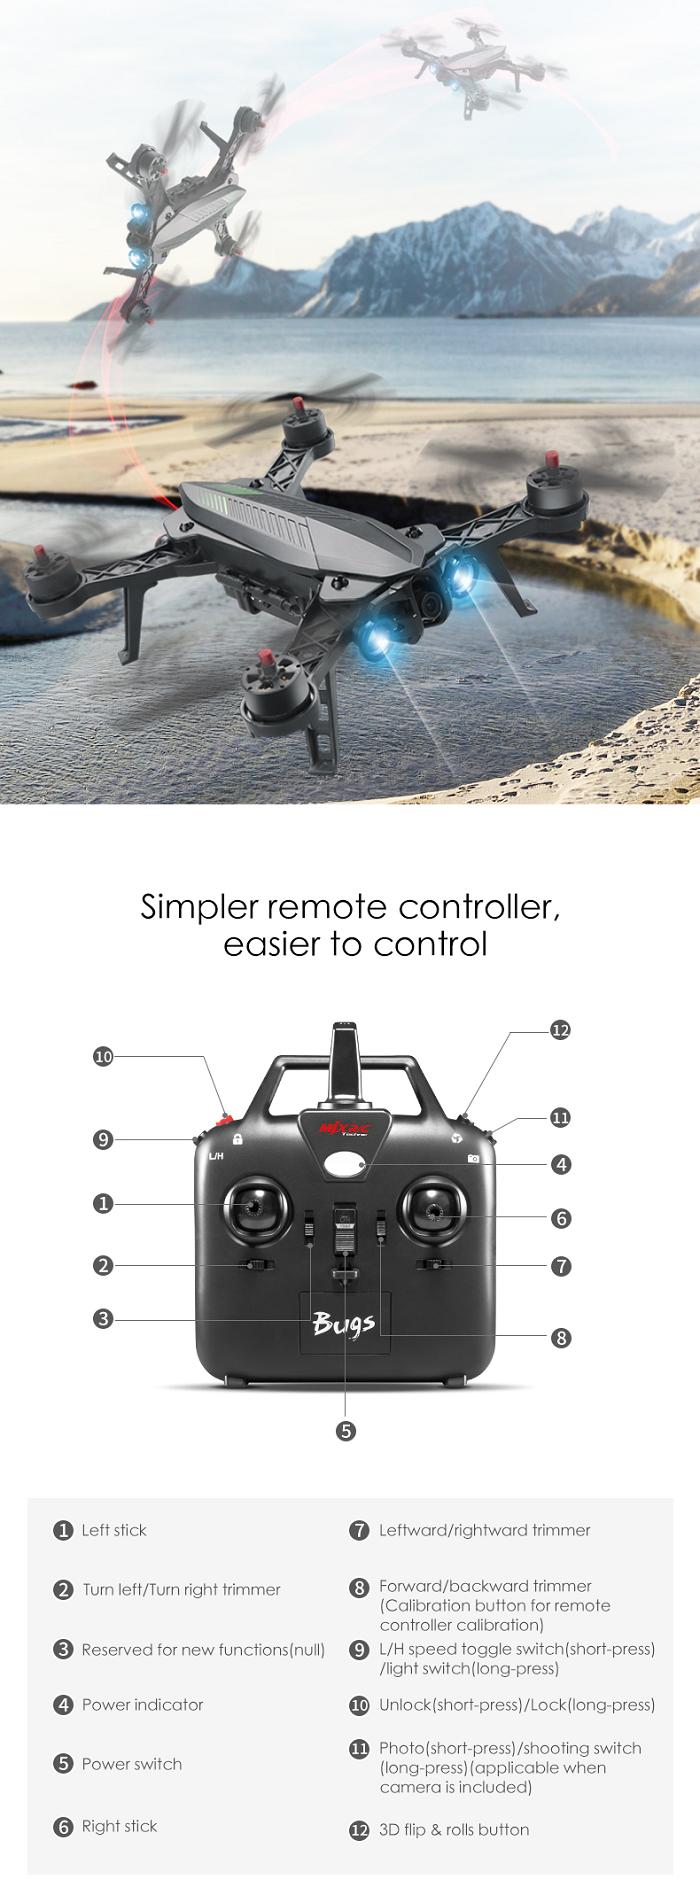 MJX-B6-Bugs-6-Brushless-with-LED-Light-3D-Roll-Racing-Drone-RC-Quadcopter-RTF-1148467-9